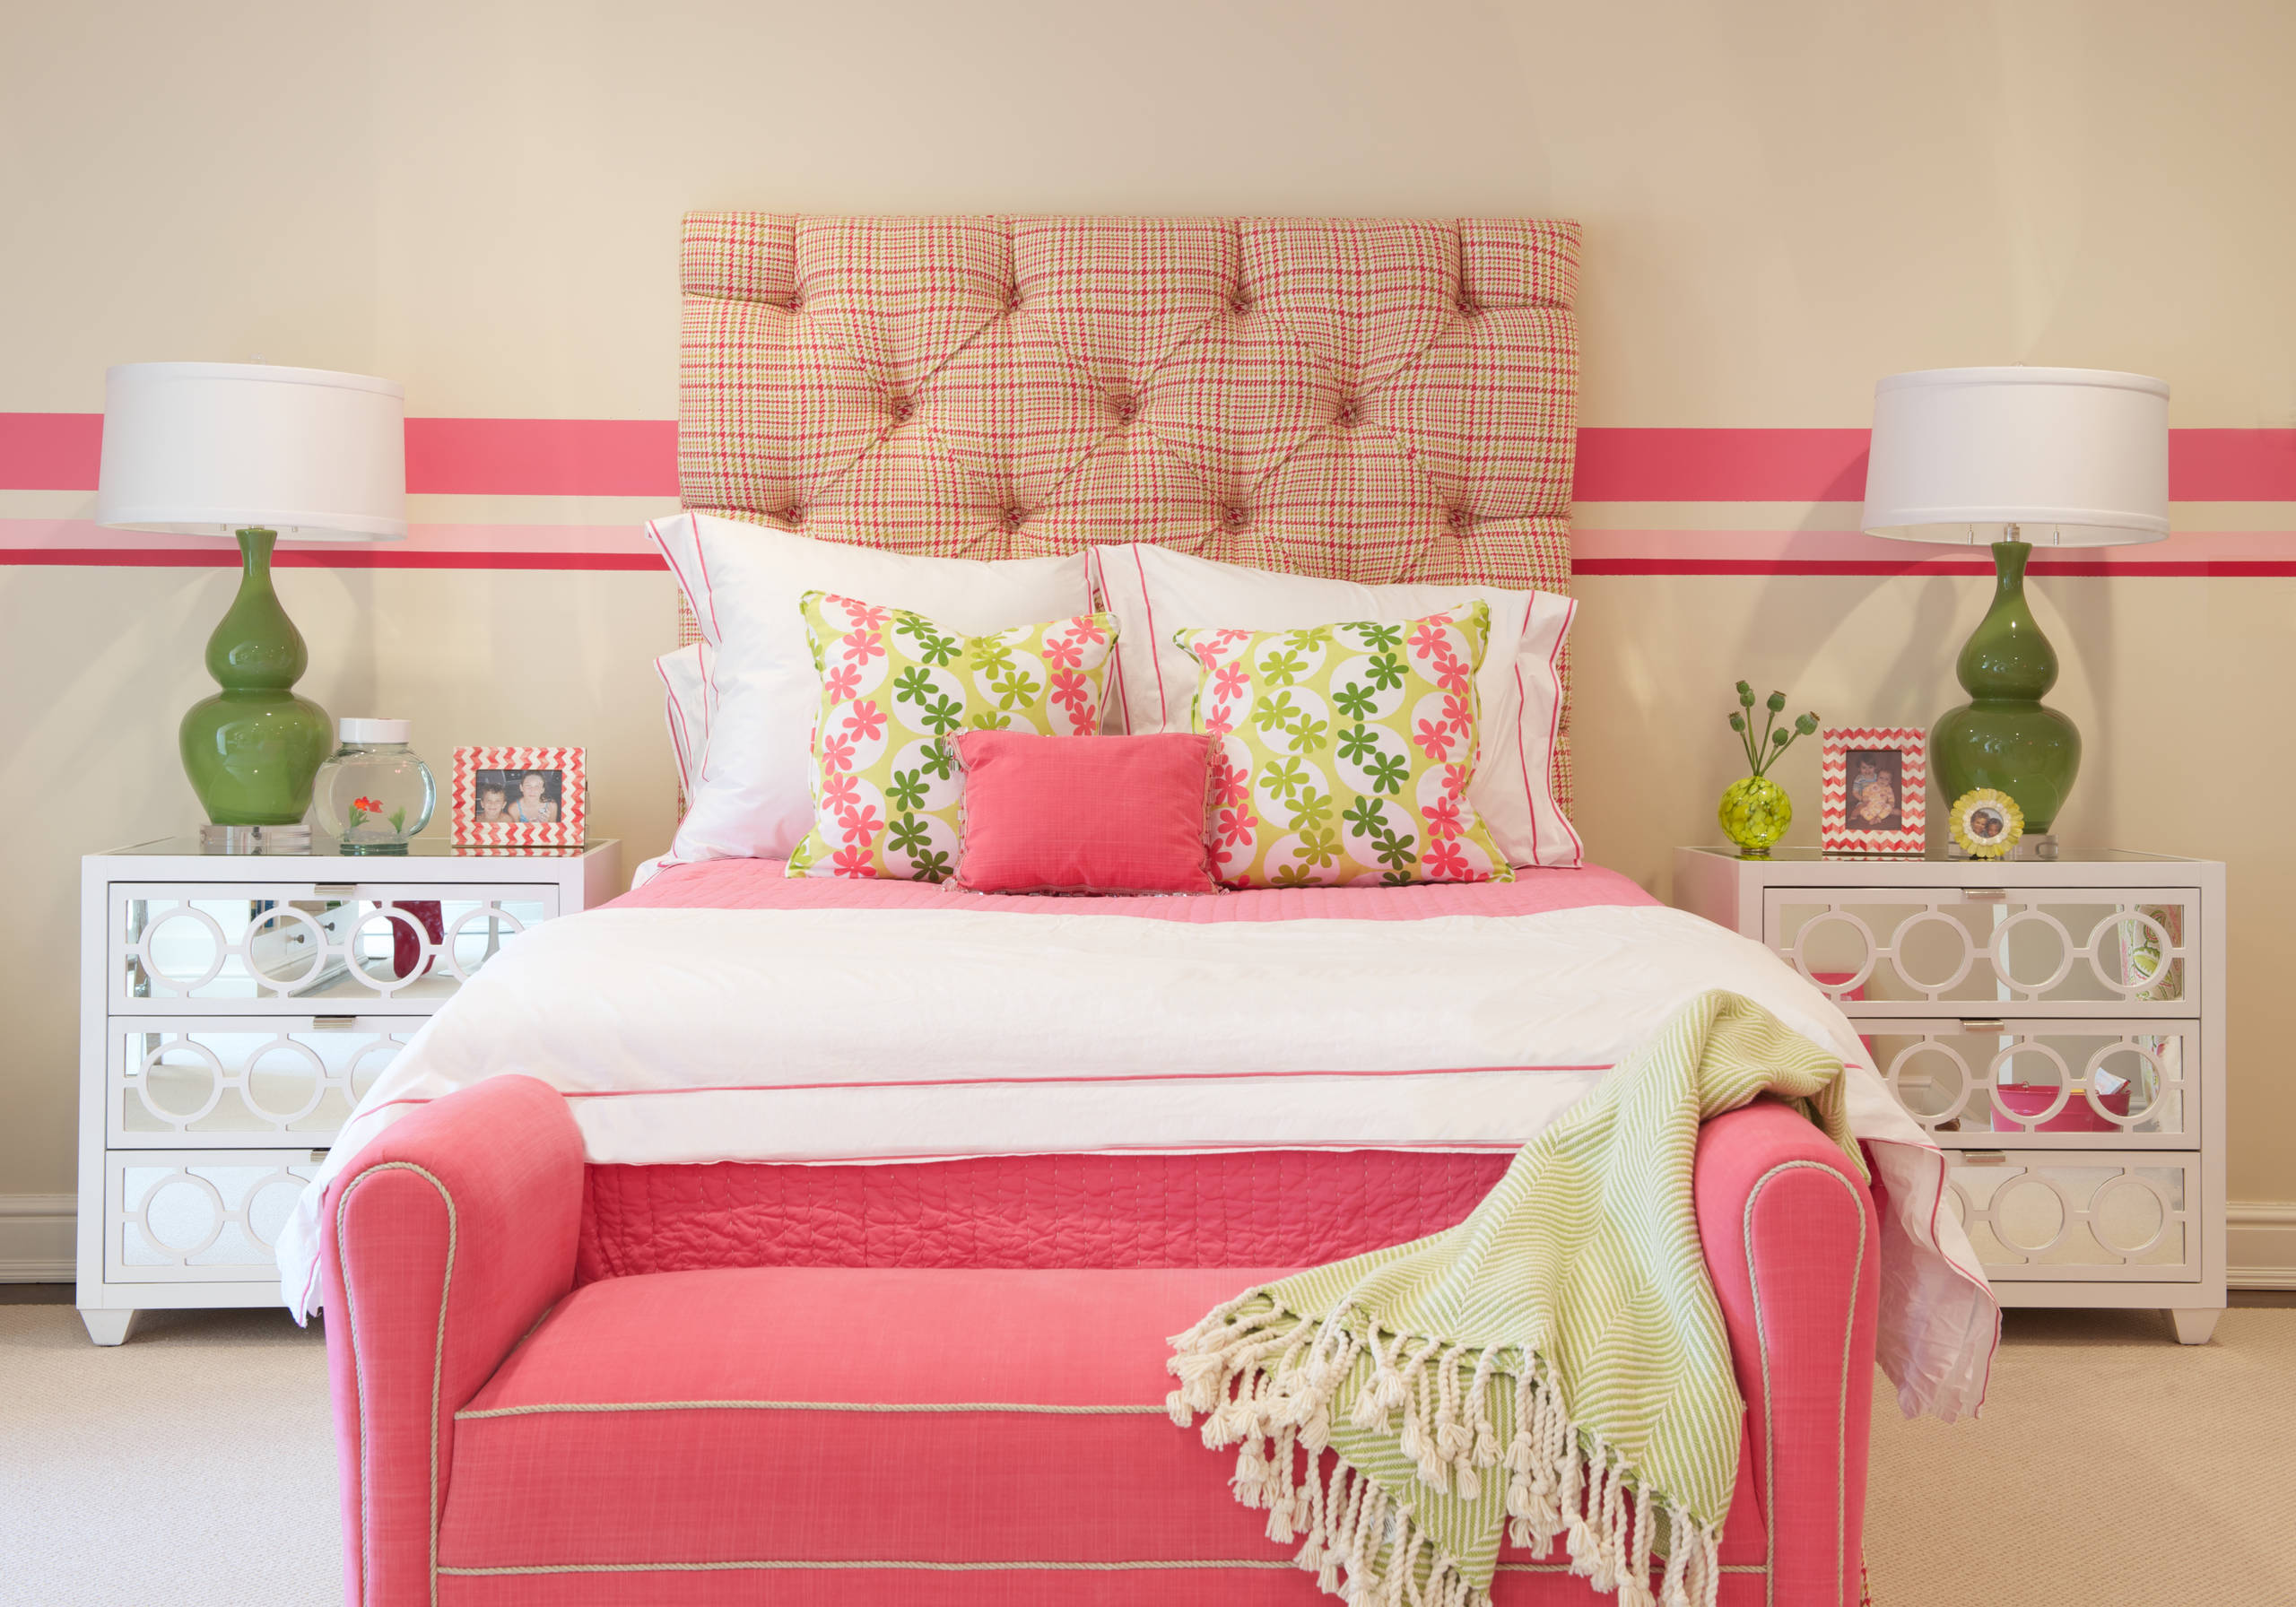 Pin on Decorating with Color